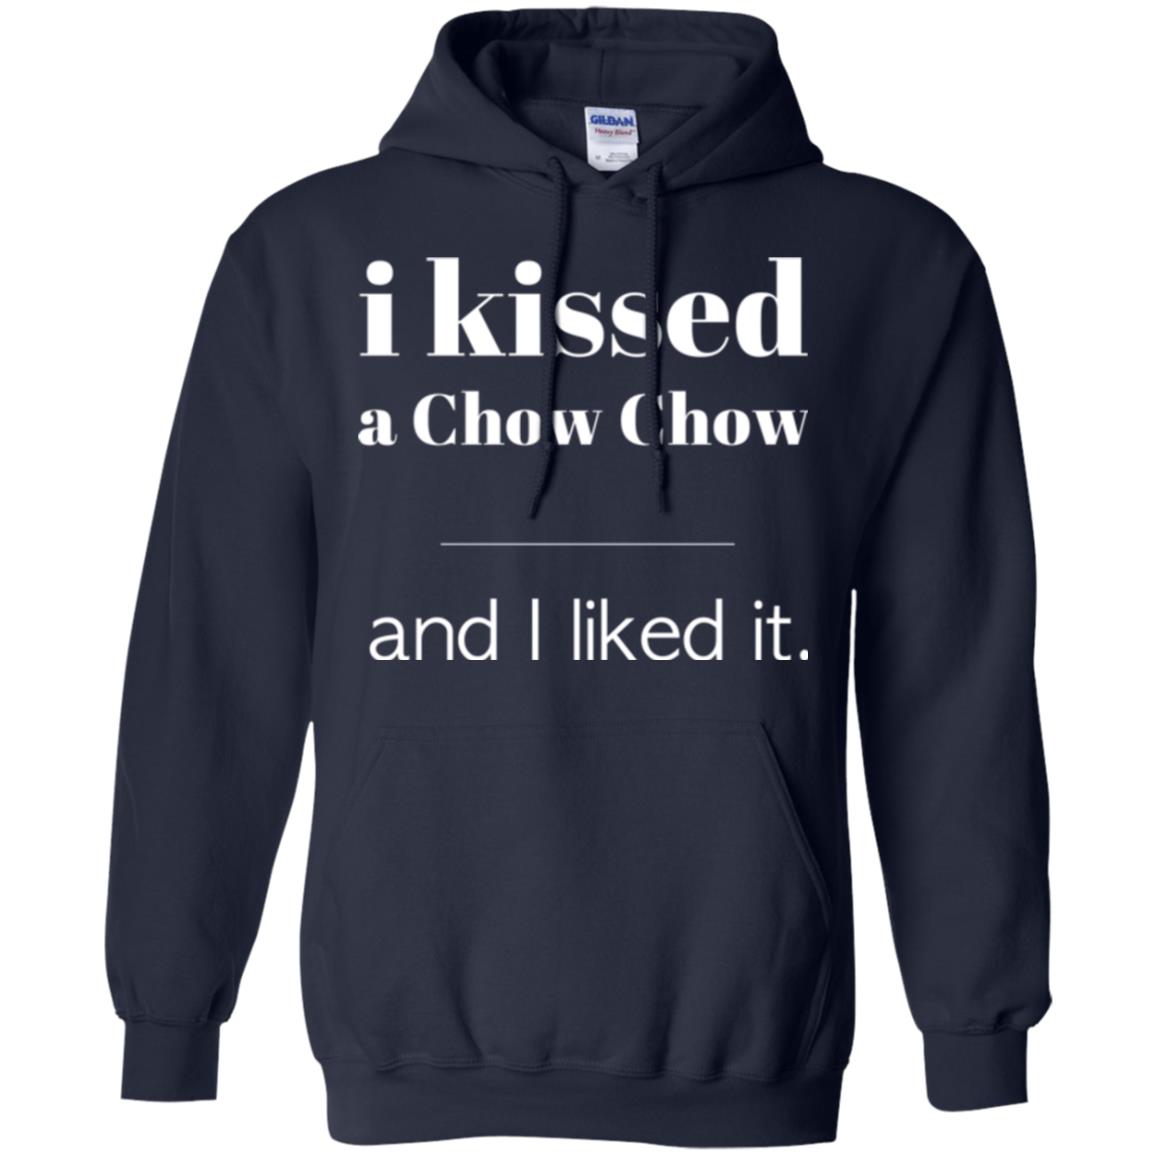 I Kissed A Chow Chow Hoodie Navy